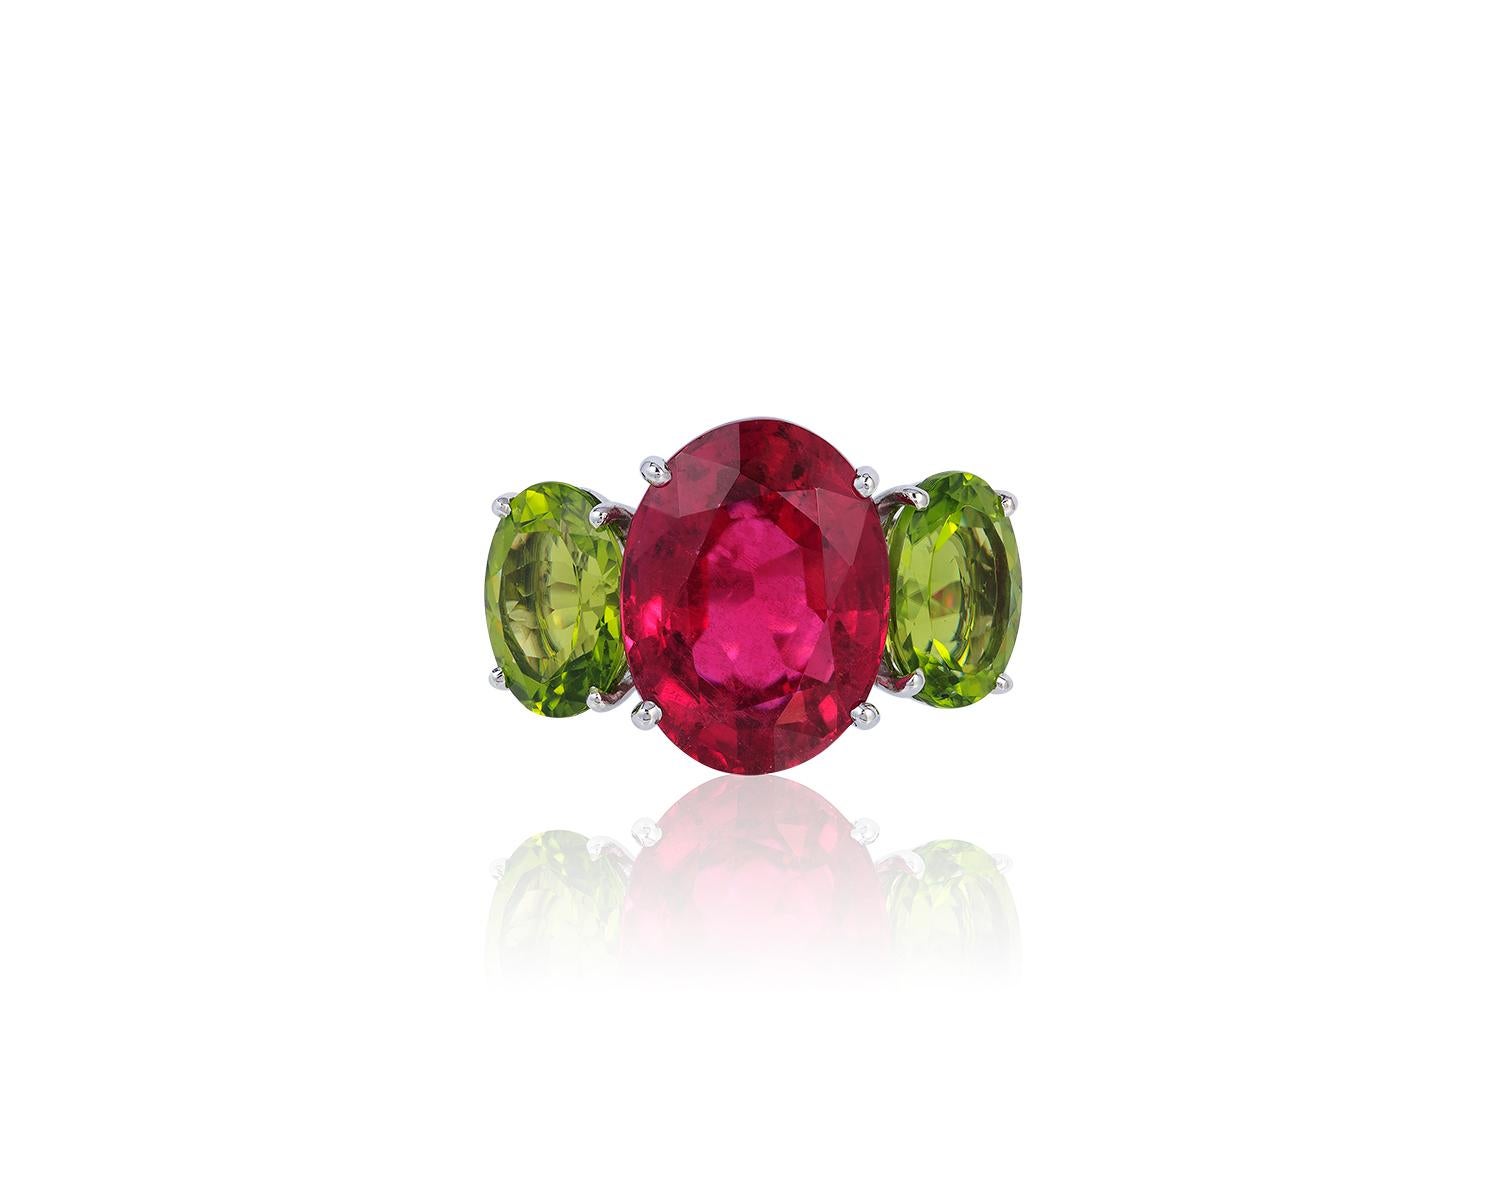 Andreoli Rubelite Peridot Platinum Ring

This ring features:
- 6.72 Carat Peridot
- 10.27 Carat Rubelite
- 8.14 Gram Platinum
- Made In Italy